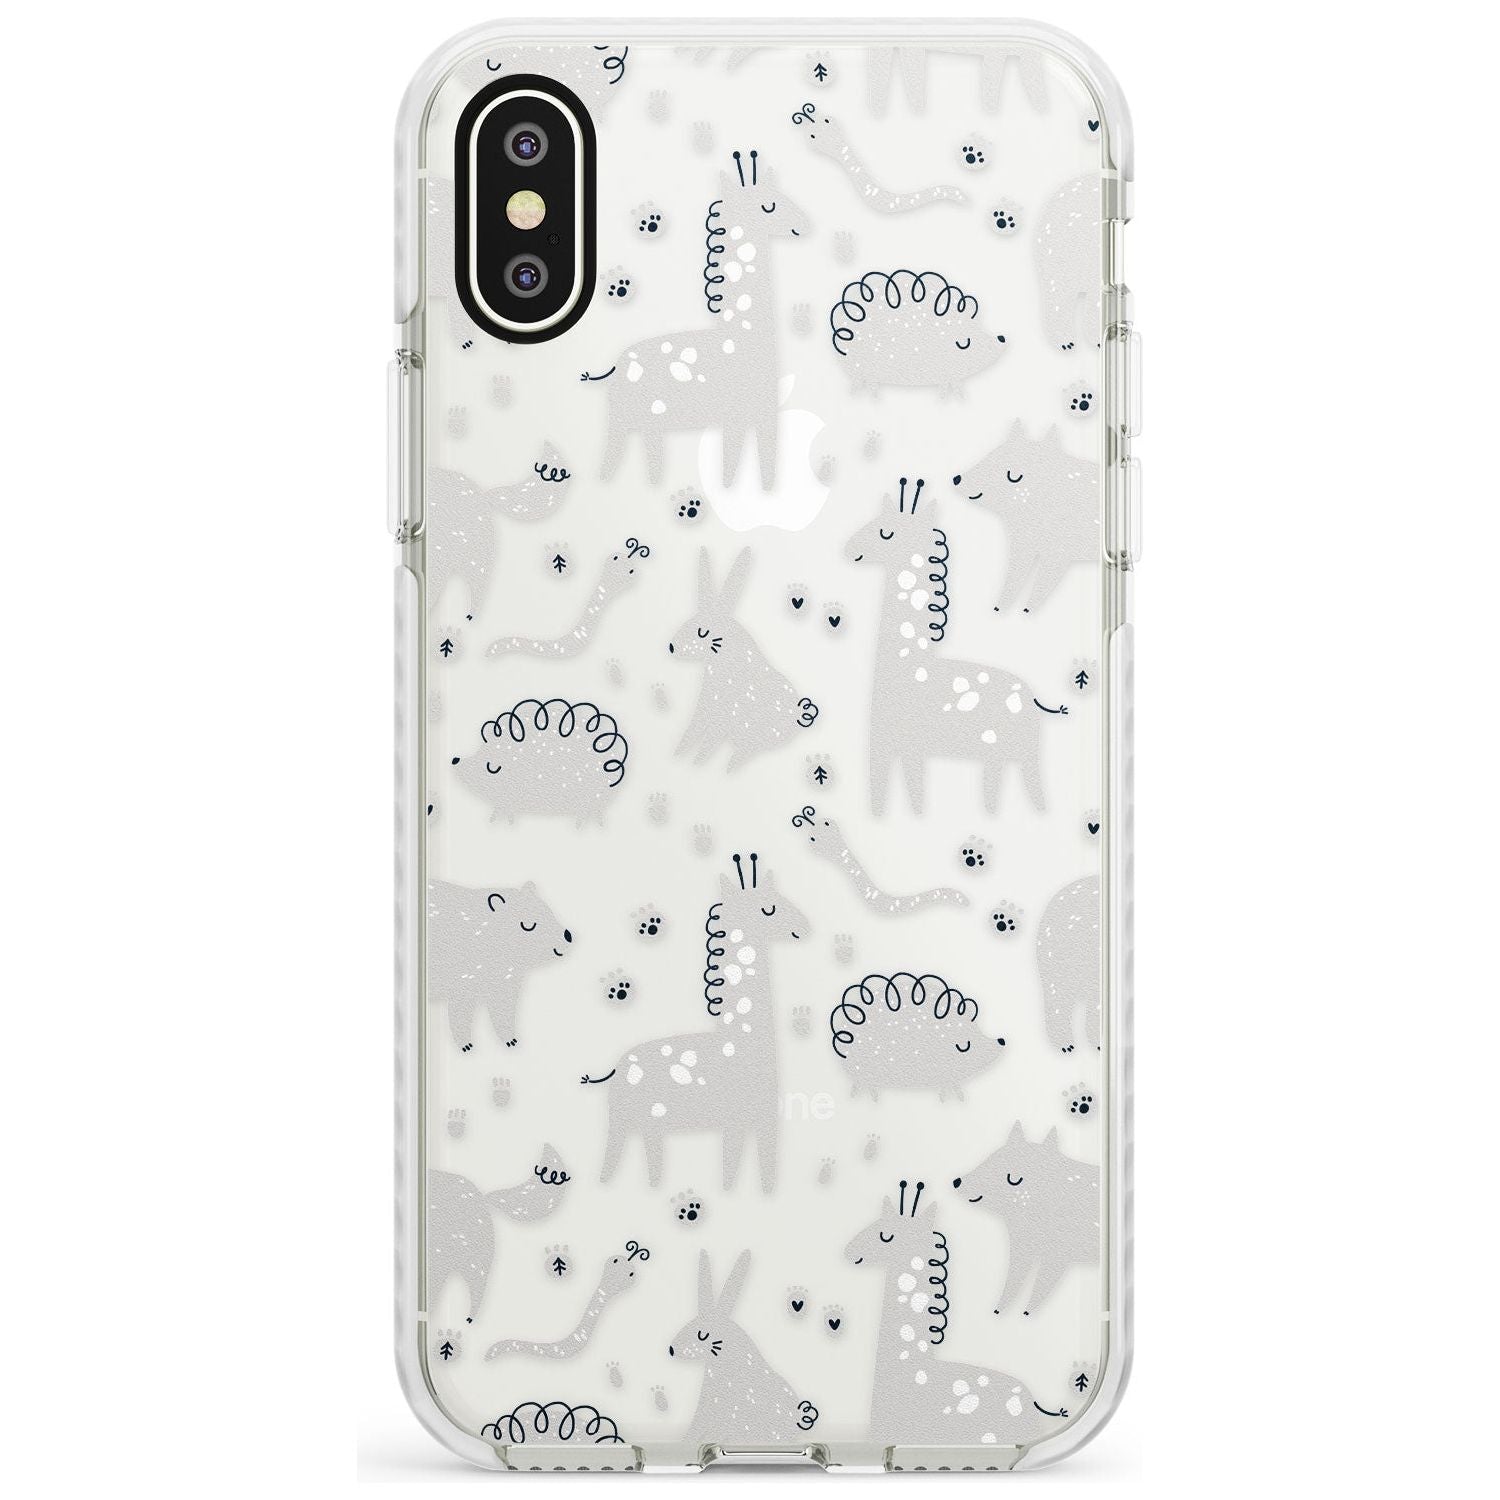 Adorable Mixed Animals Pattern (Clear) Impact Phone Case for iPhone X XS Max XR